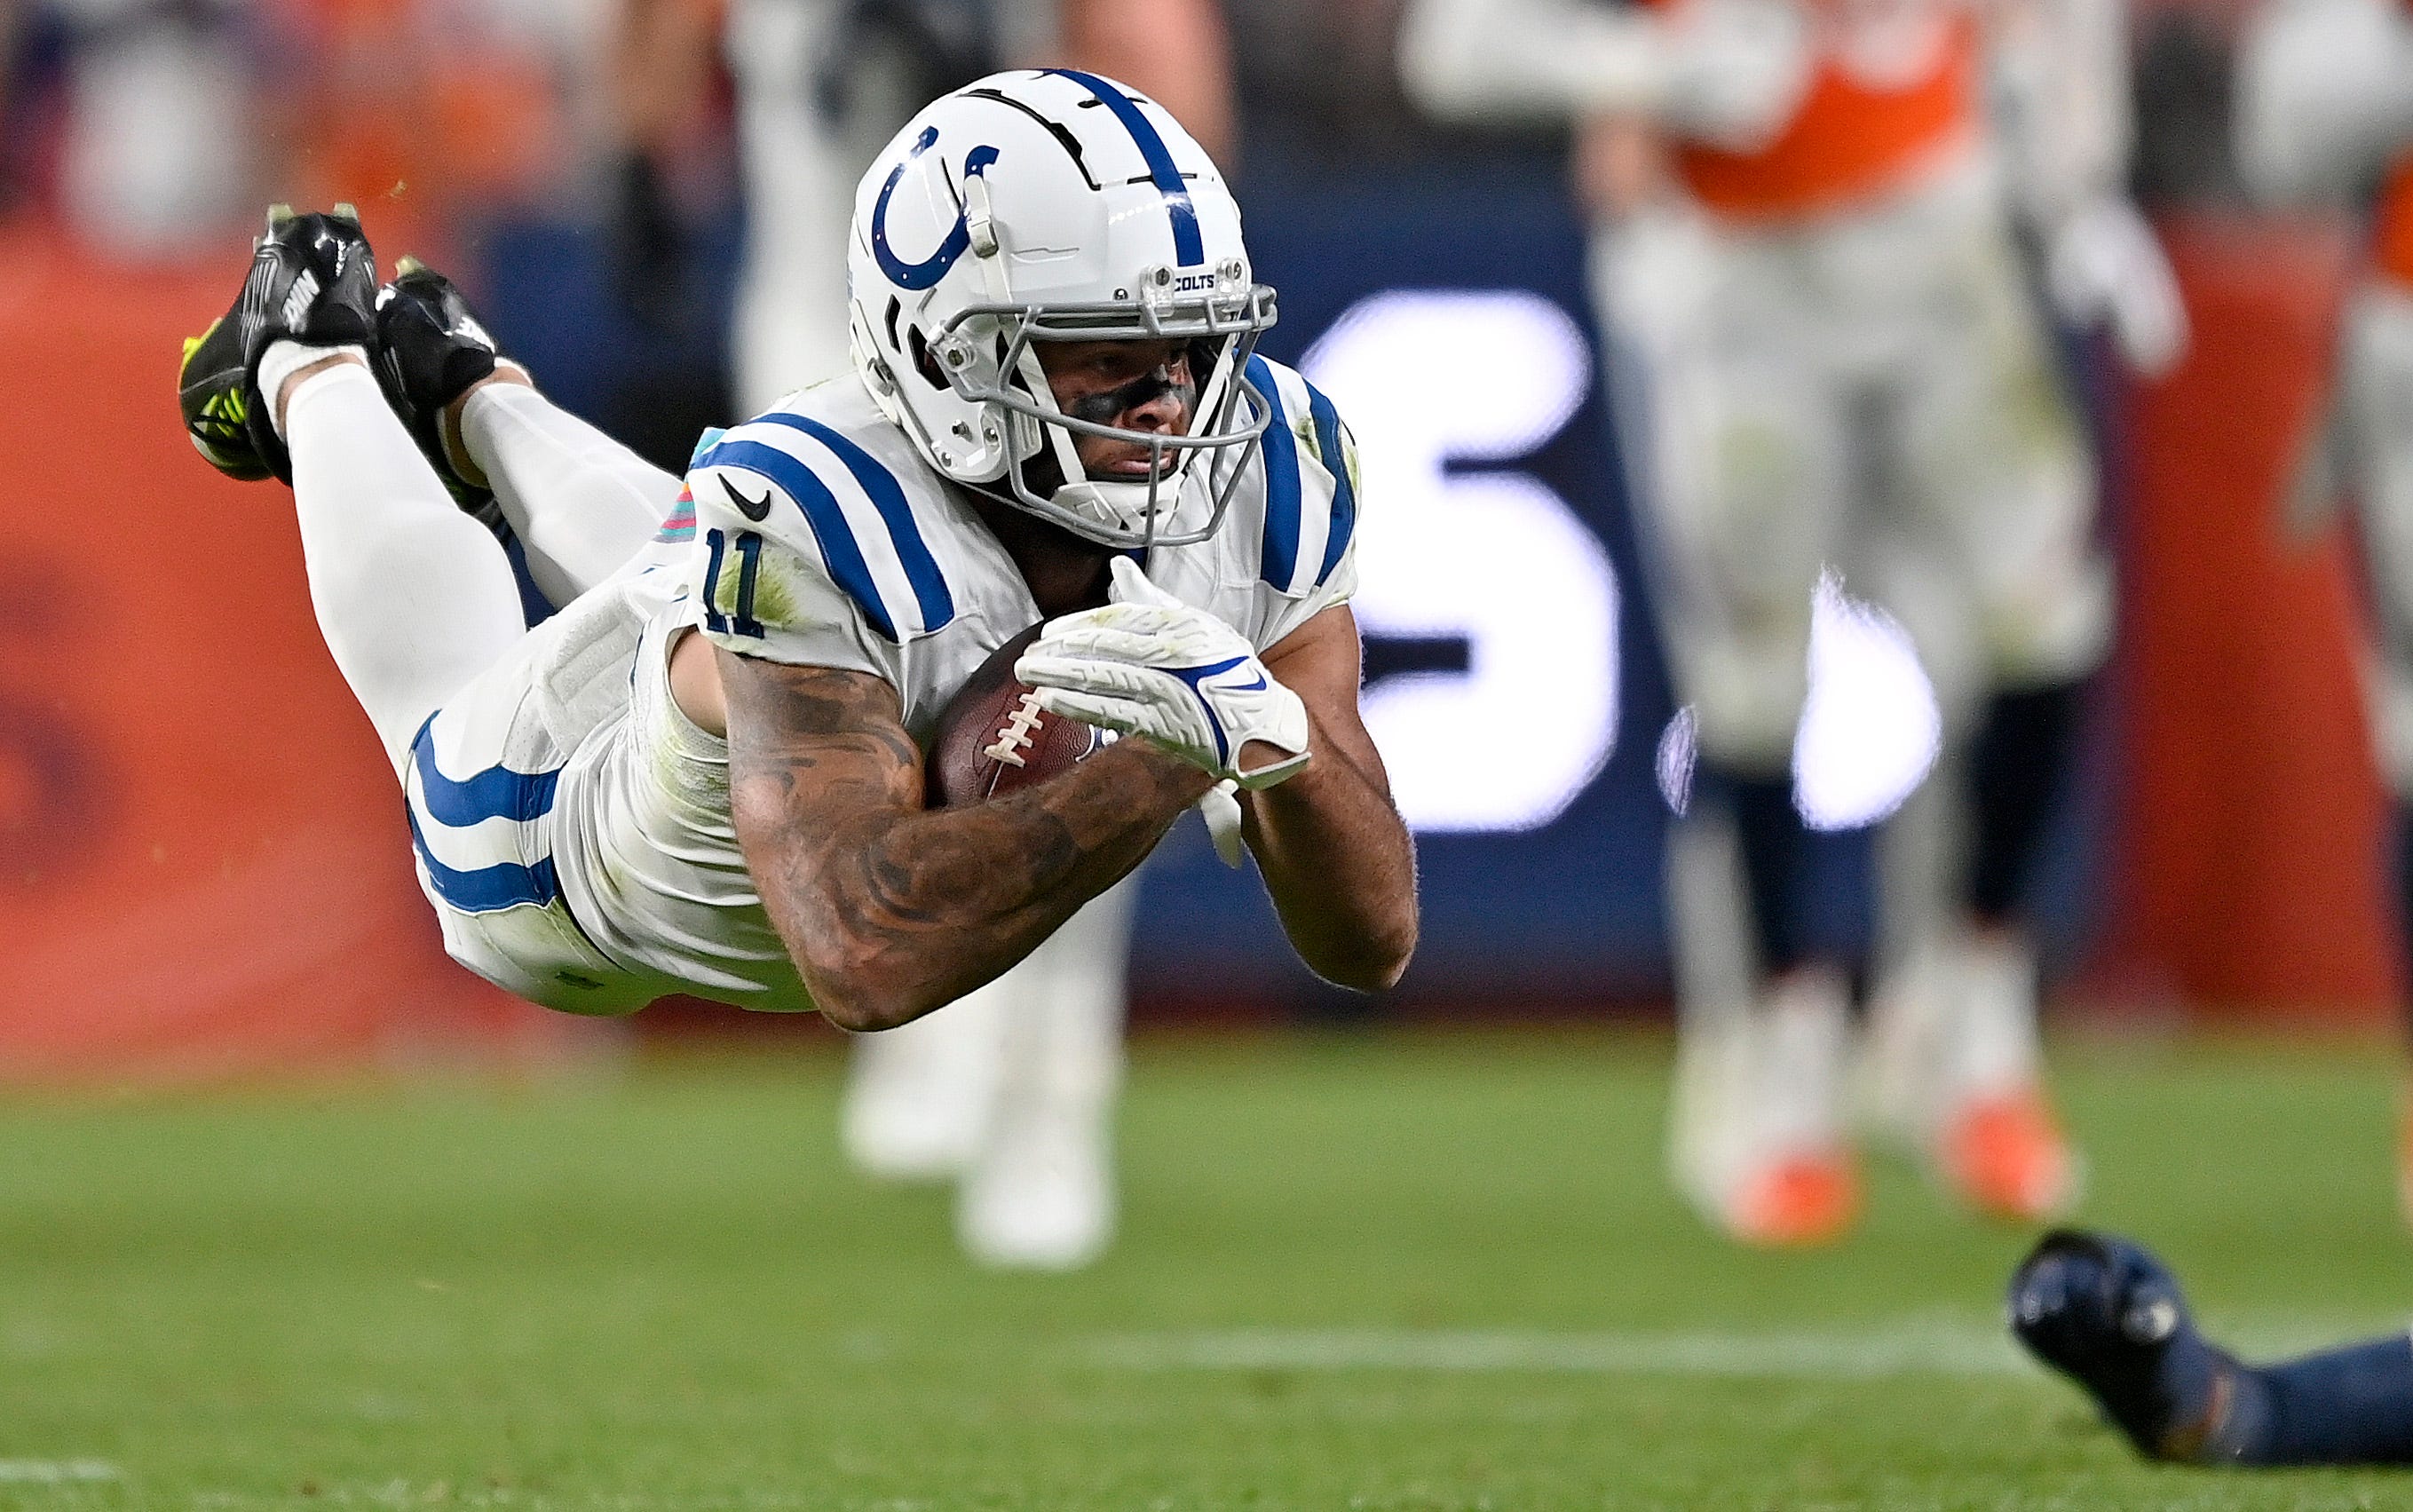 Michael Pittman Jr. is the Indianapolis Colts' No. 1 receiver, cracking 1,000 yards for the first time in 2021.